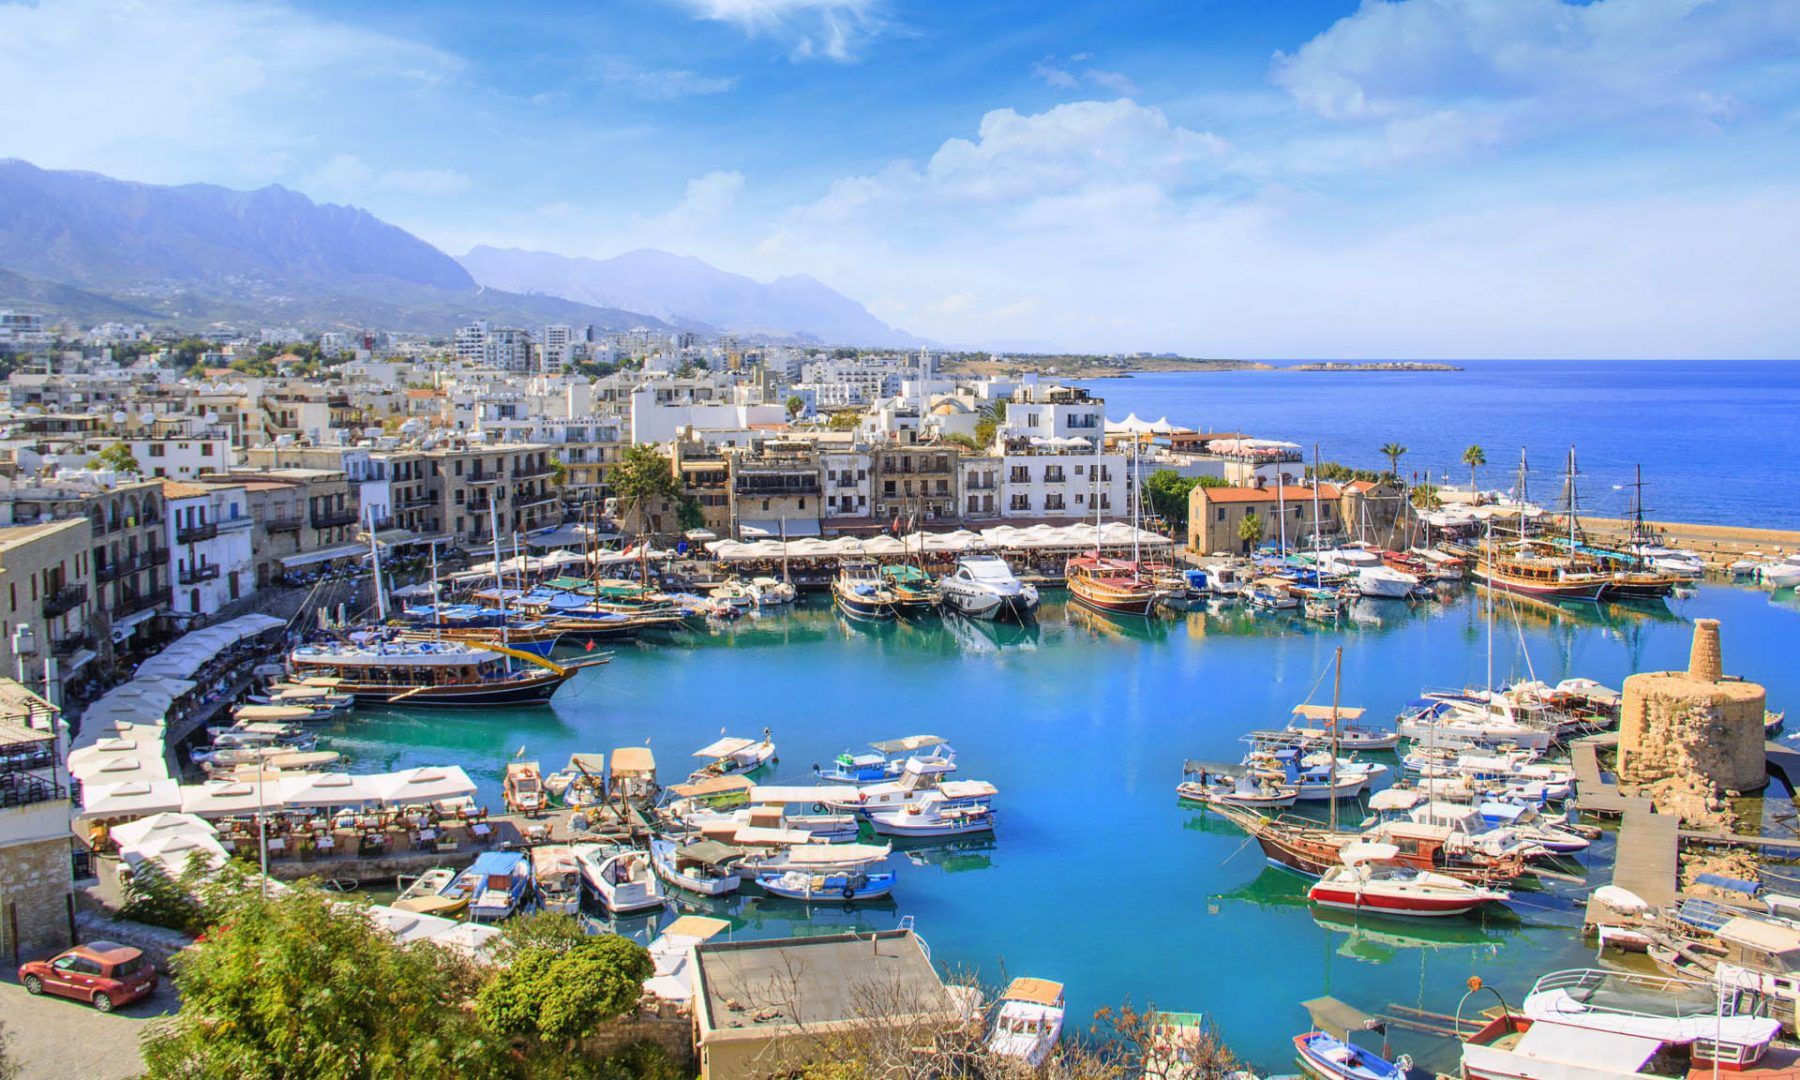 Kyrenia (Girne) - Frequently asked questions about Cyprus